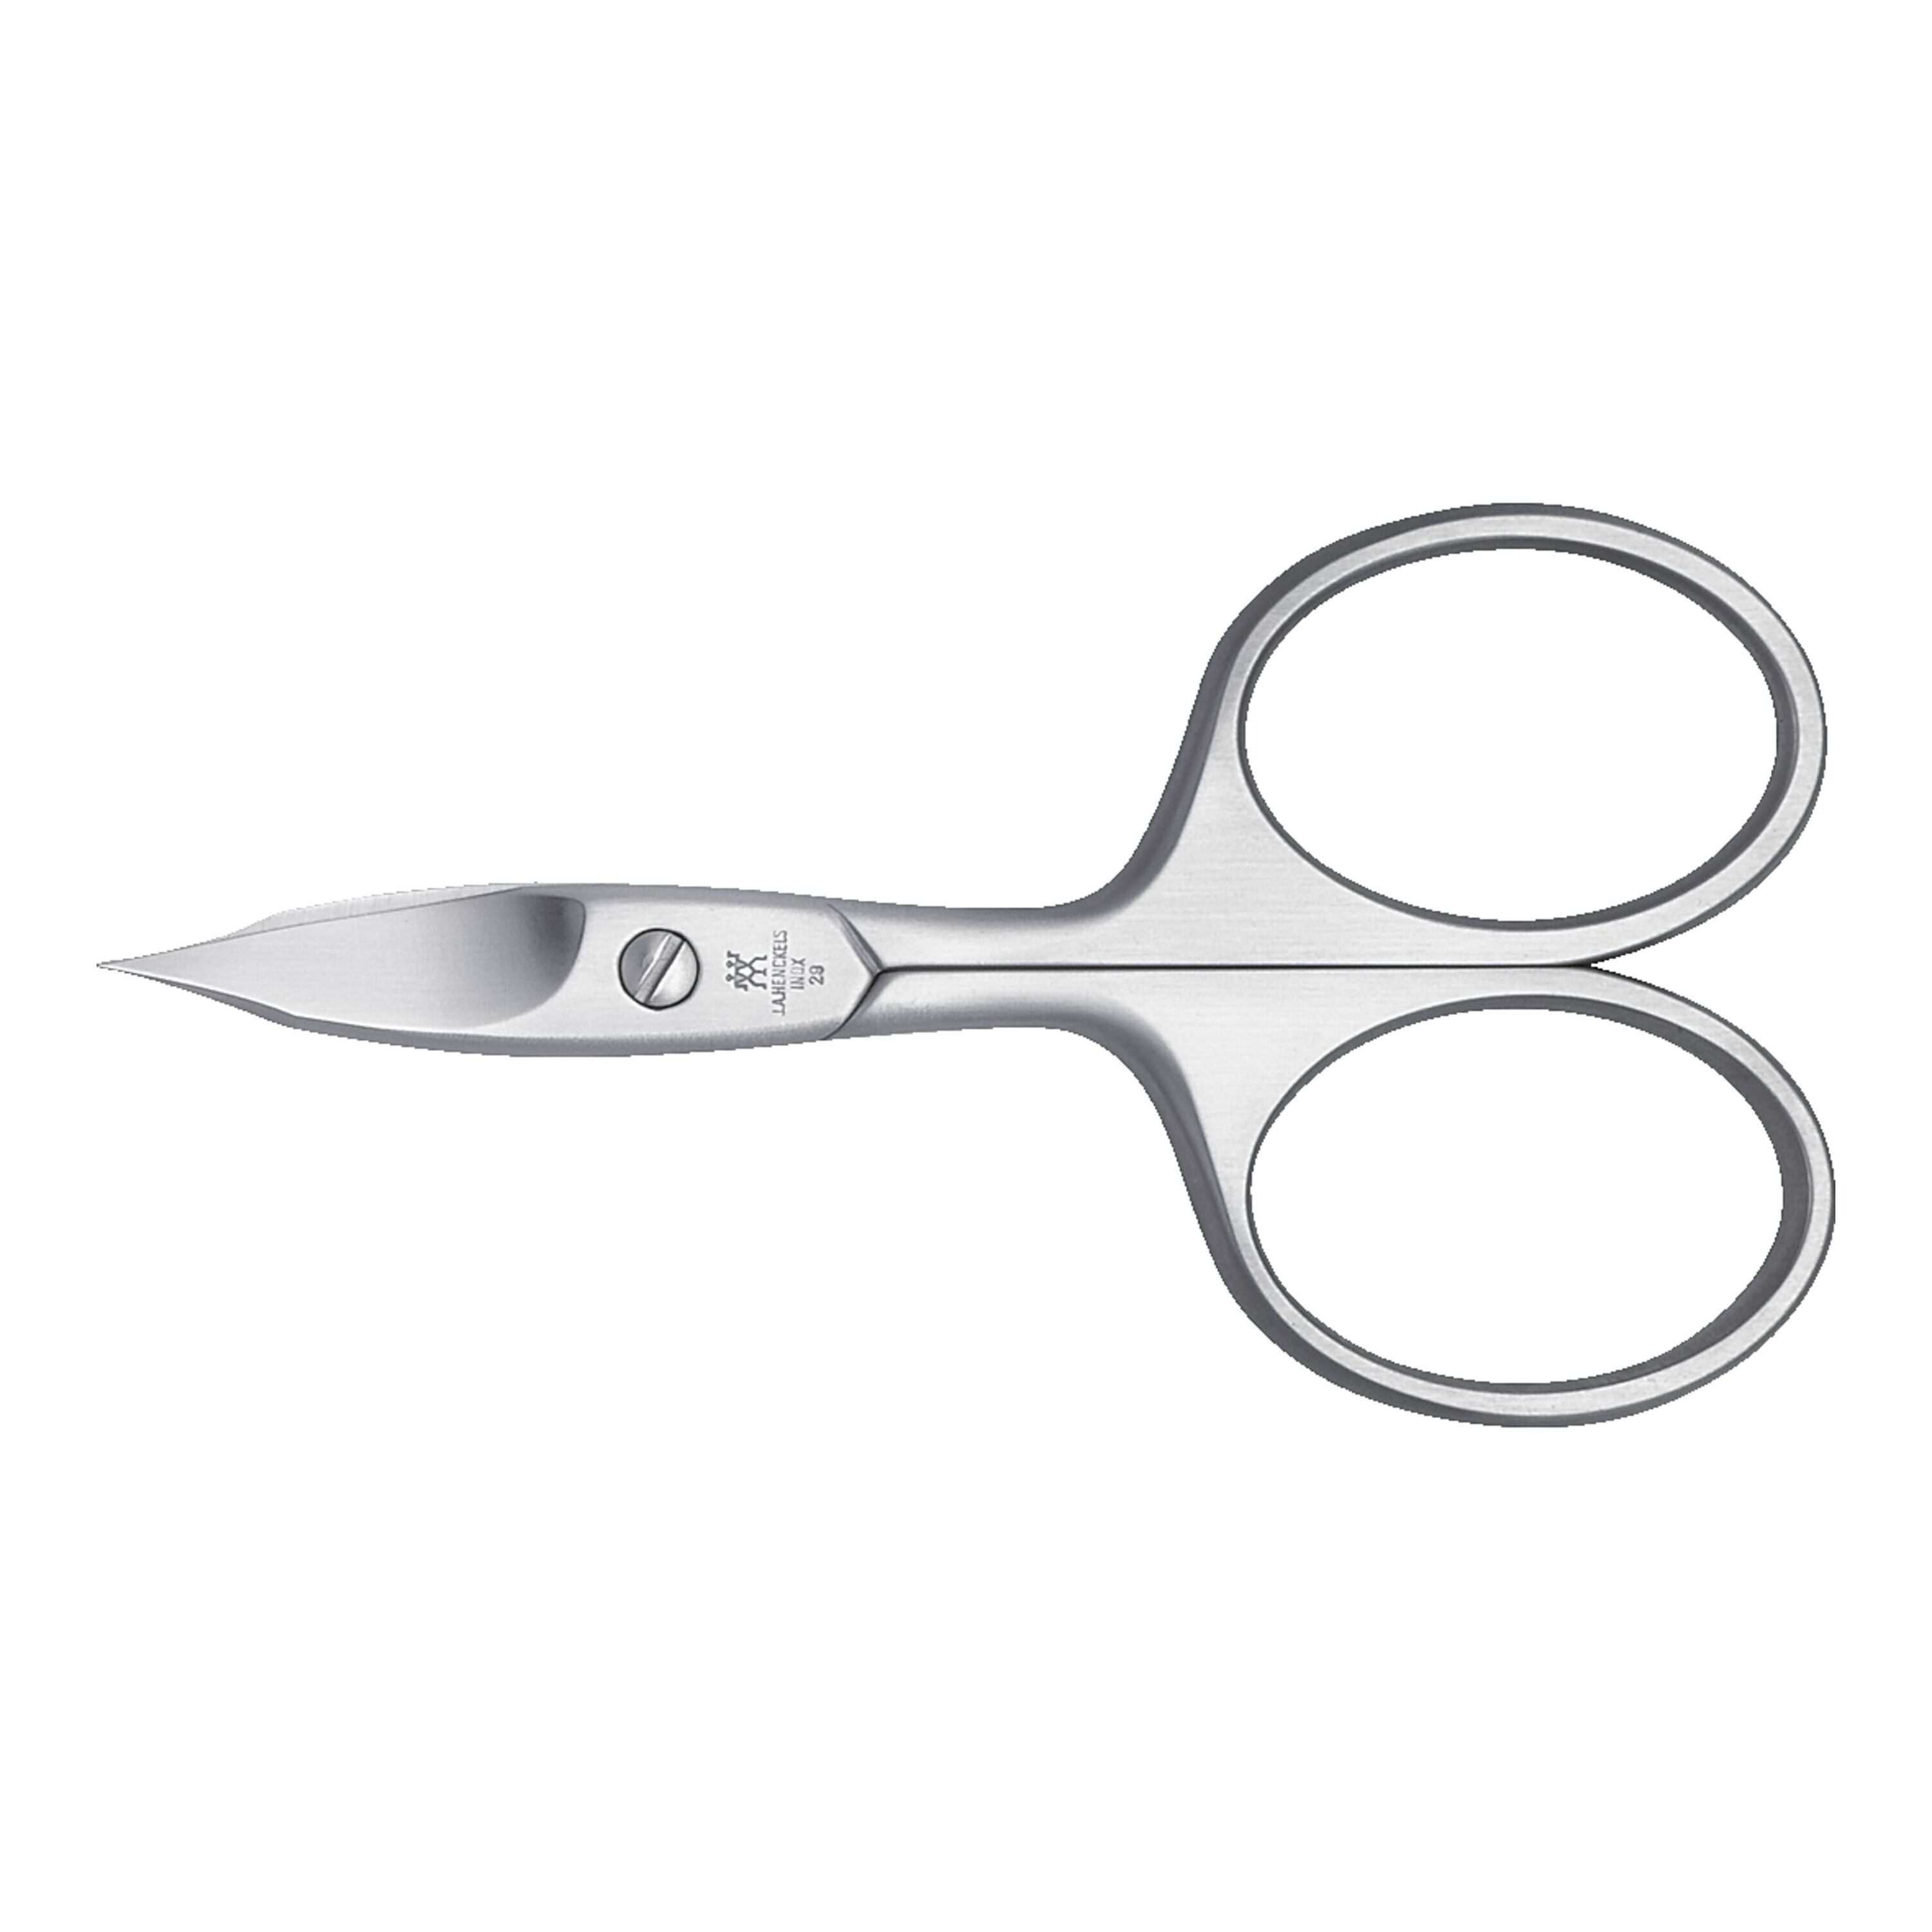 Nail and cuticle scissor, TWIN Classic - Zwilling